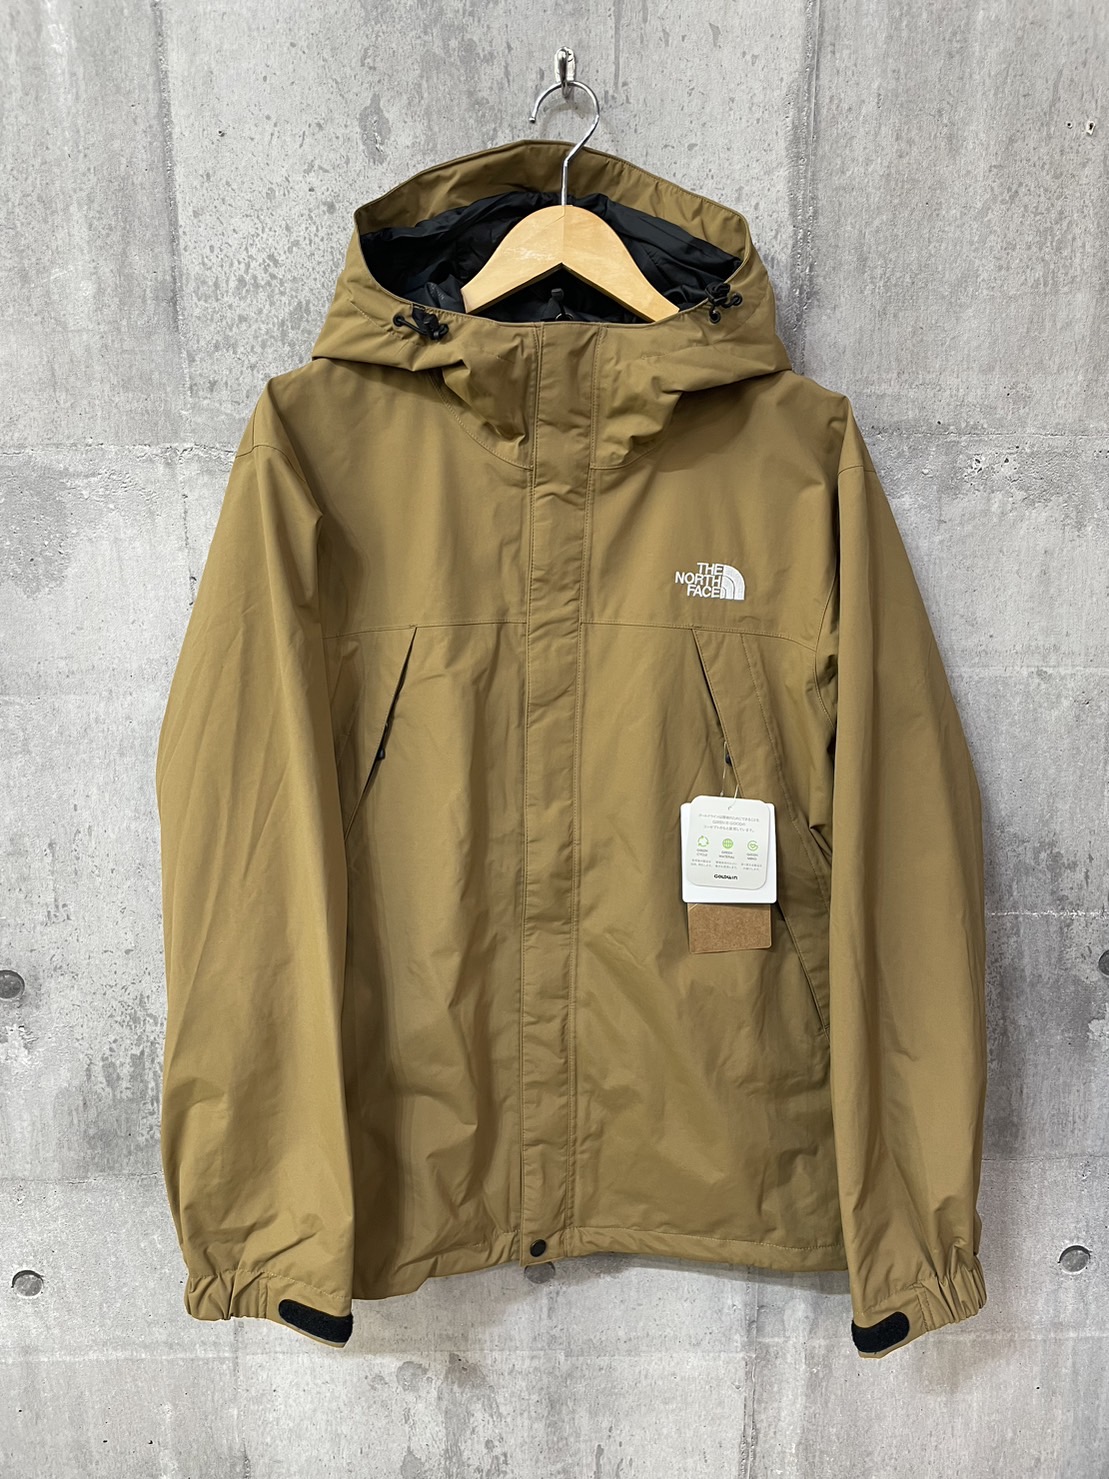 THE NORTH FACE NP61940 SCOOP JACKET